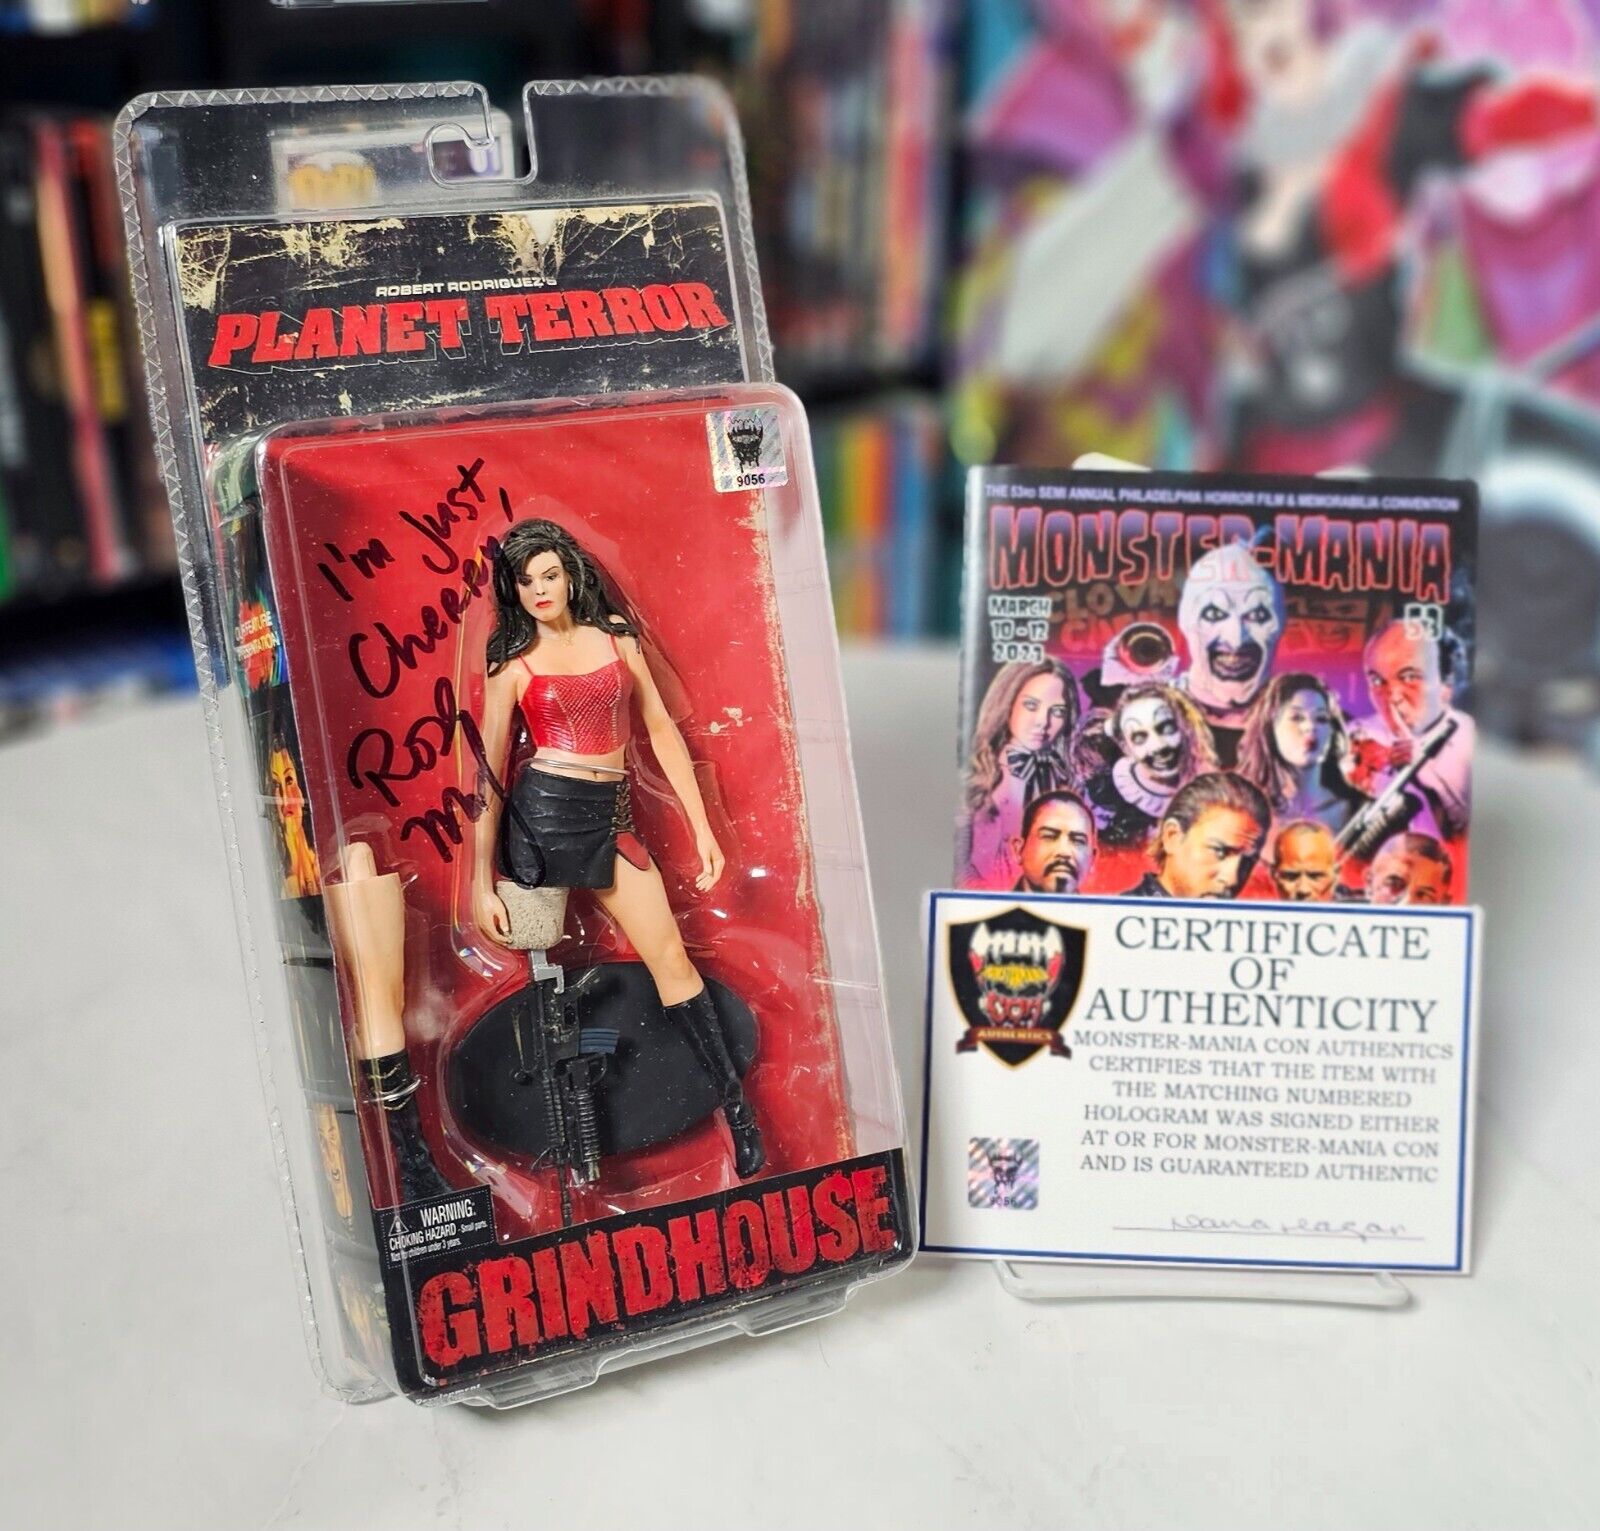 SIGNED w/ QUOTE ROSE McGOWAN NECA PLANET TERROR GRINDHOUSE CHERRY DARLING FIGURE